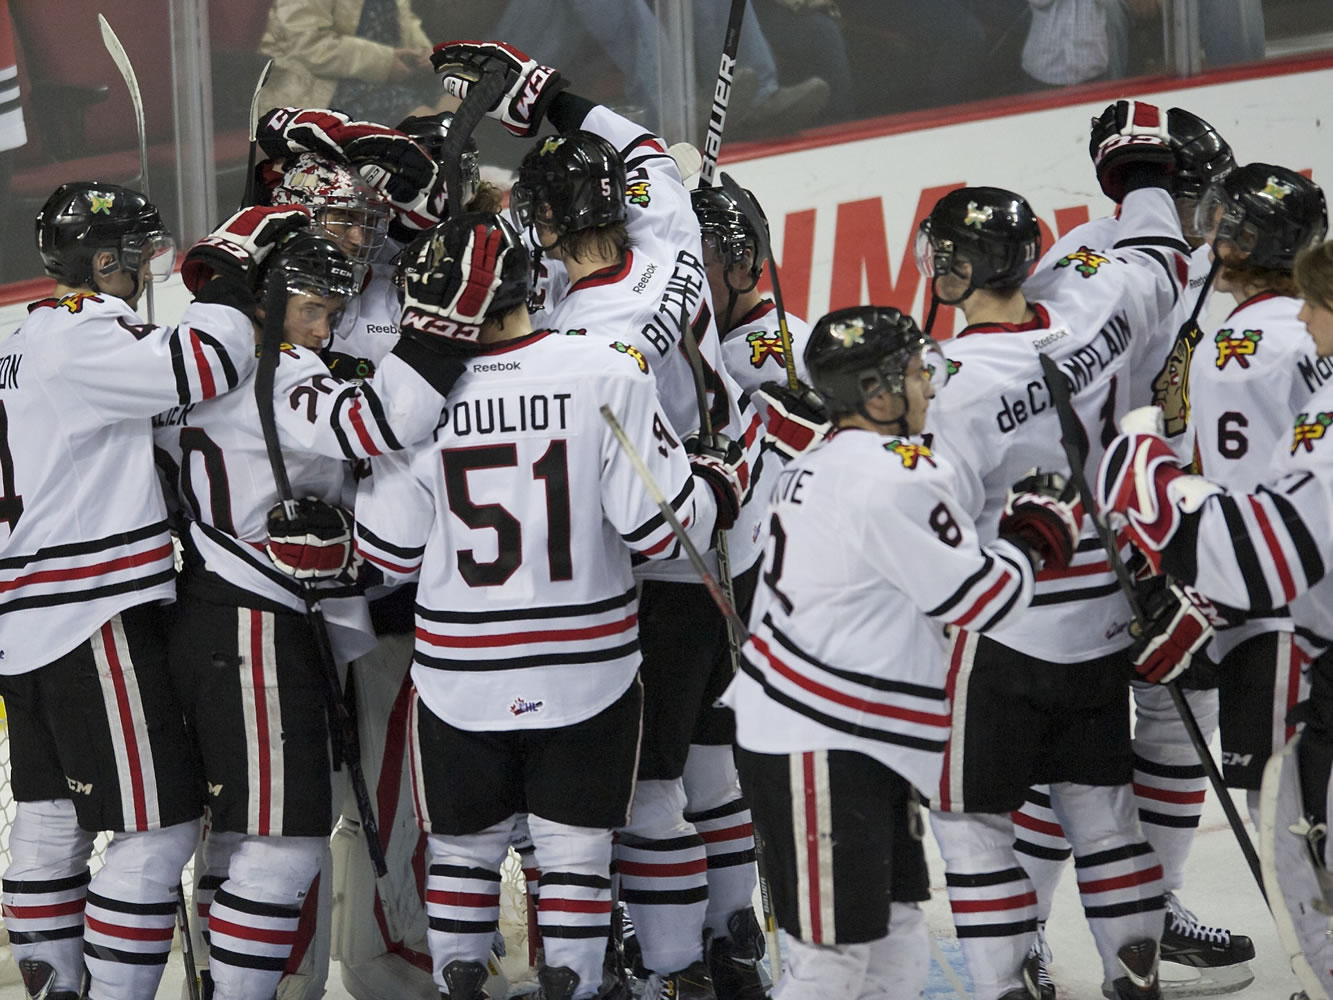 The Portland Winterhawks celebrate a 3-0 victory against the Spokane Chiefs in game two of a second round playoff matchup on Saturday April 6, 2013. Portland takes a 2-0 lead in the series.